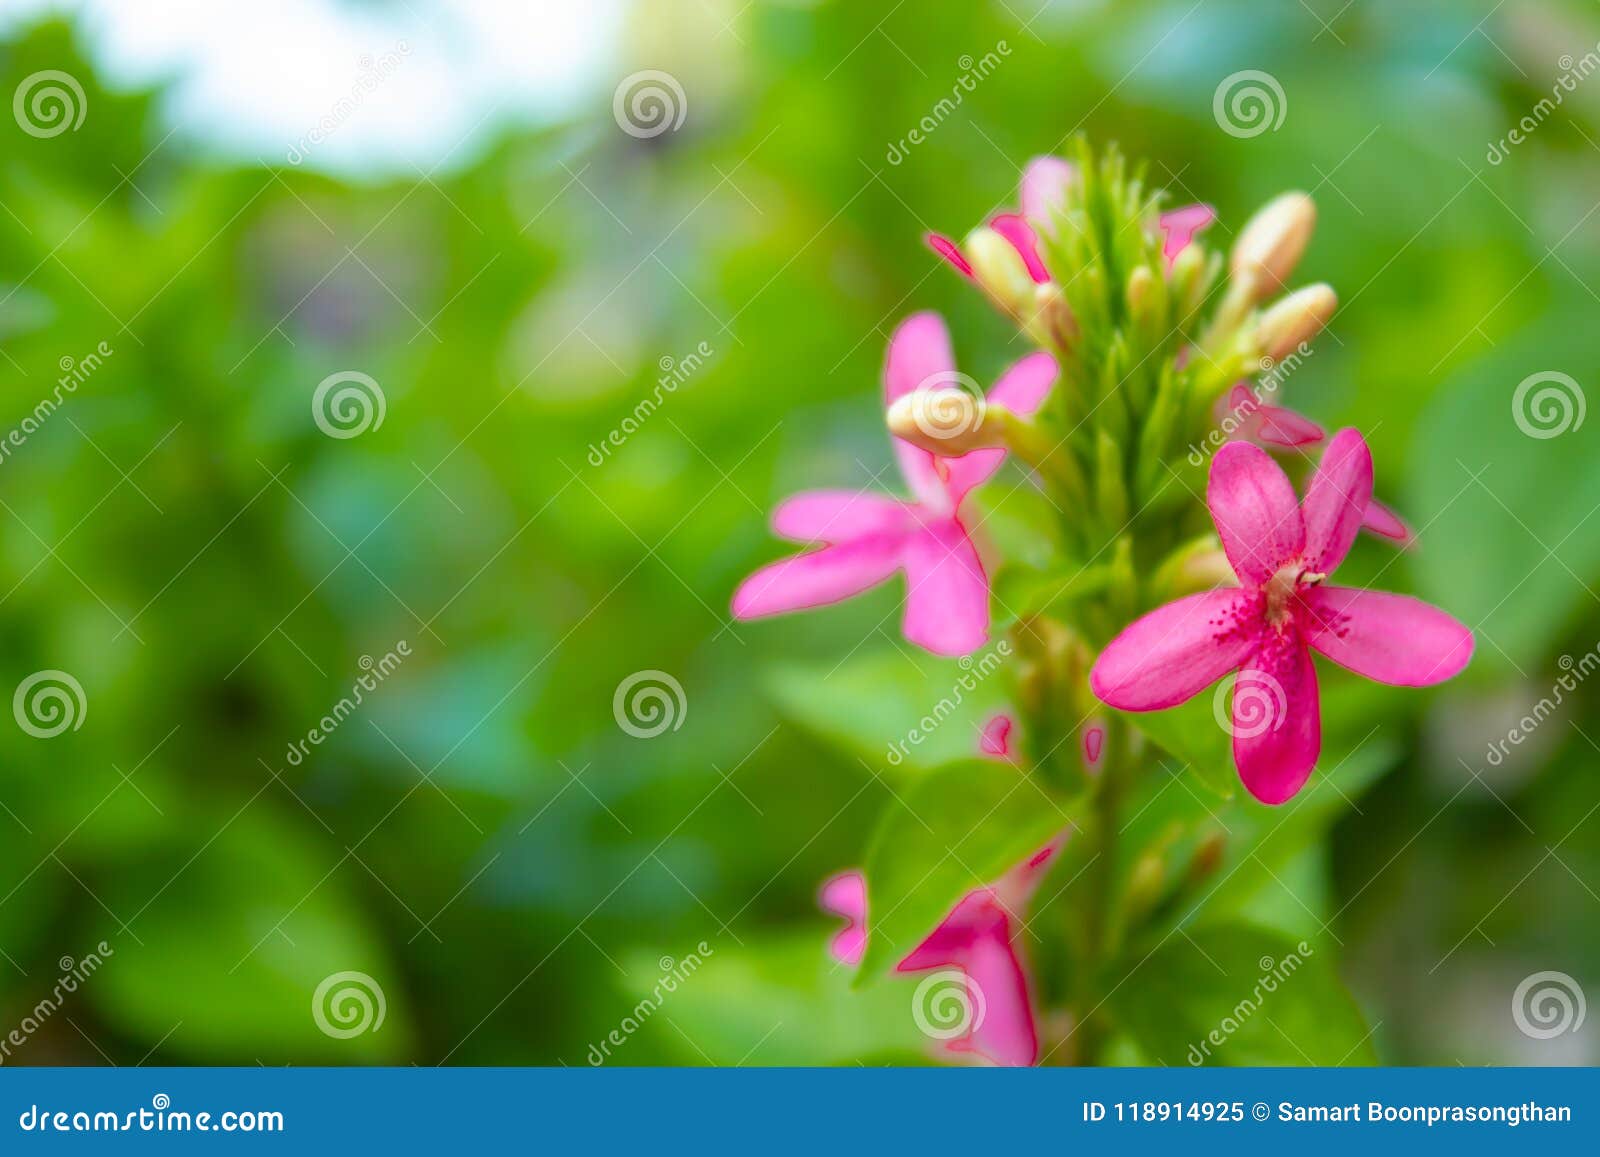 Pink Flowers on Green Leaves in Background. Stock Image - Image of